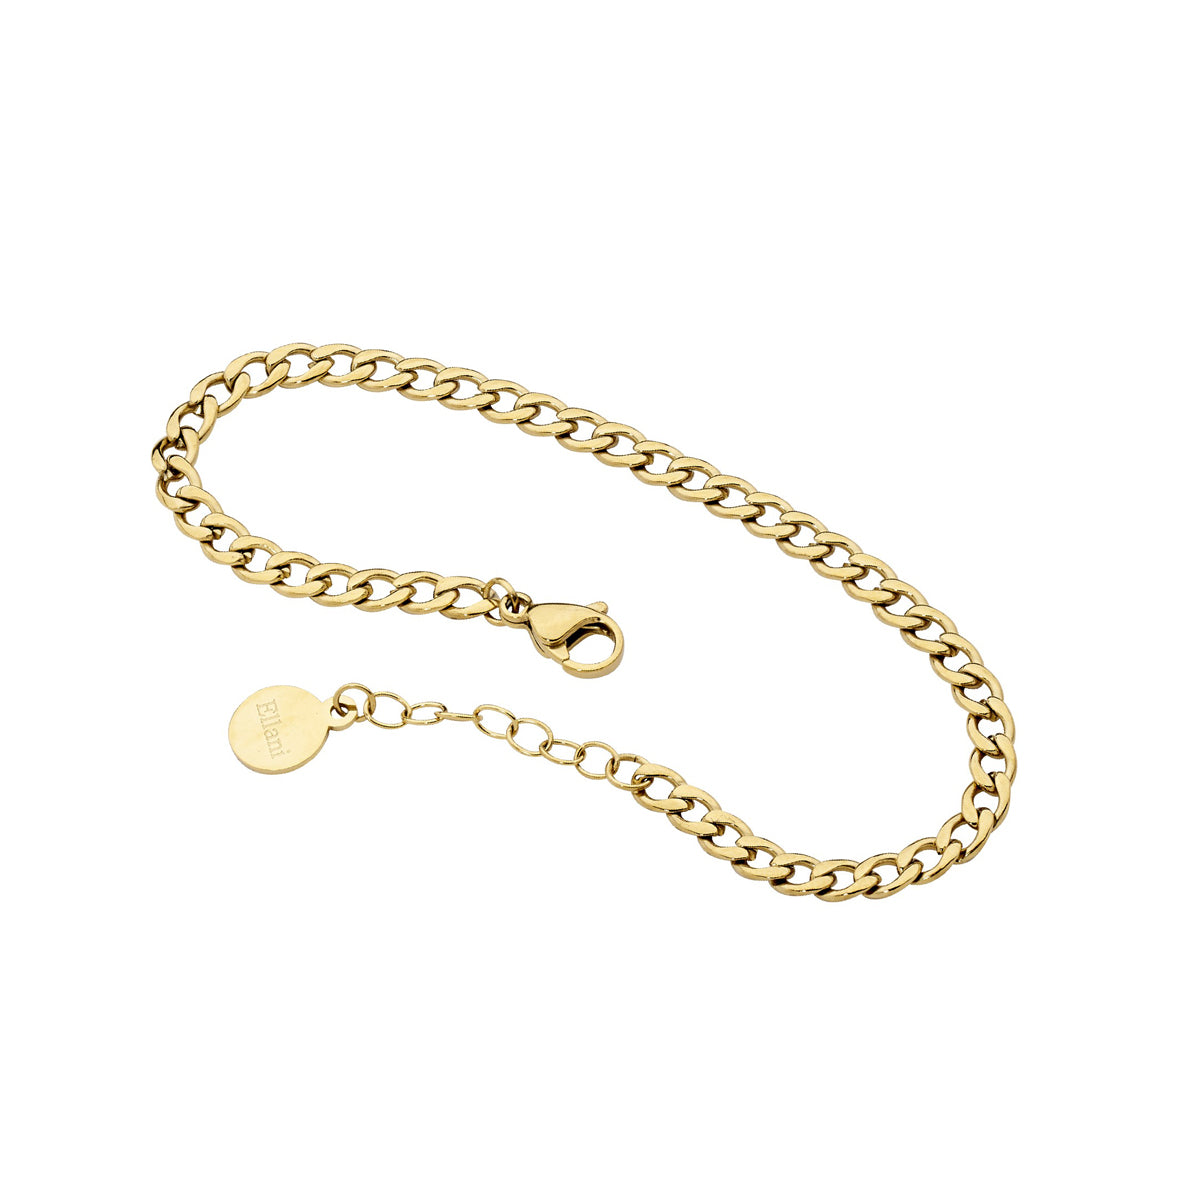 Stainless Steel Curb Chain Bracelet, 17cm+ Ext. With Gold IP Plating 